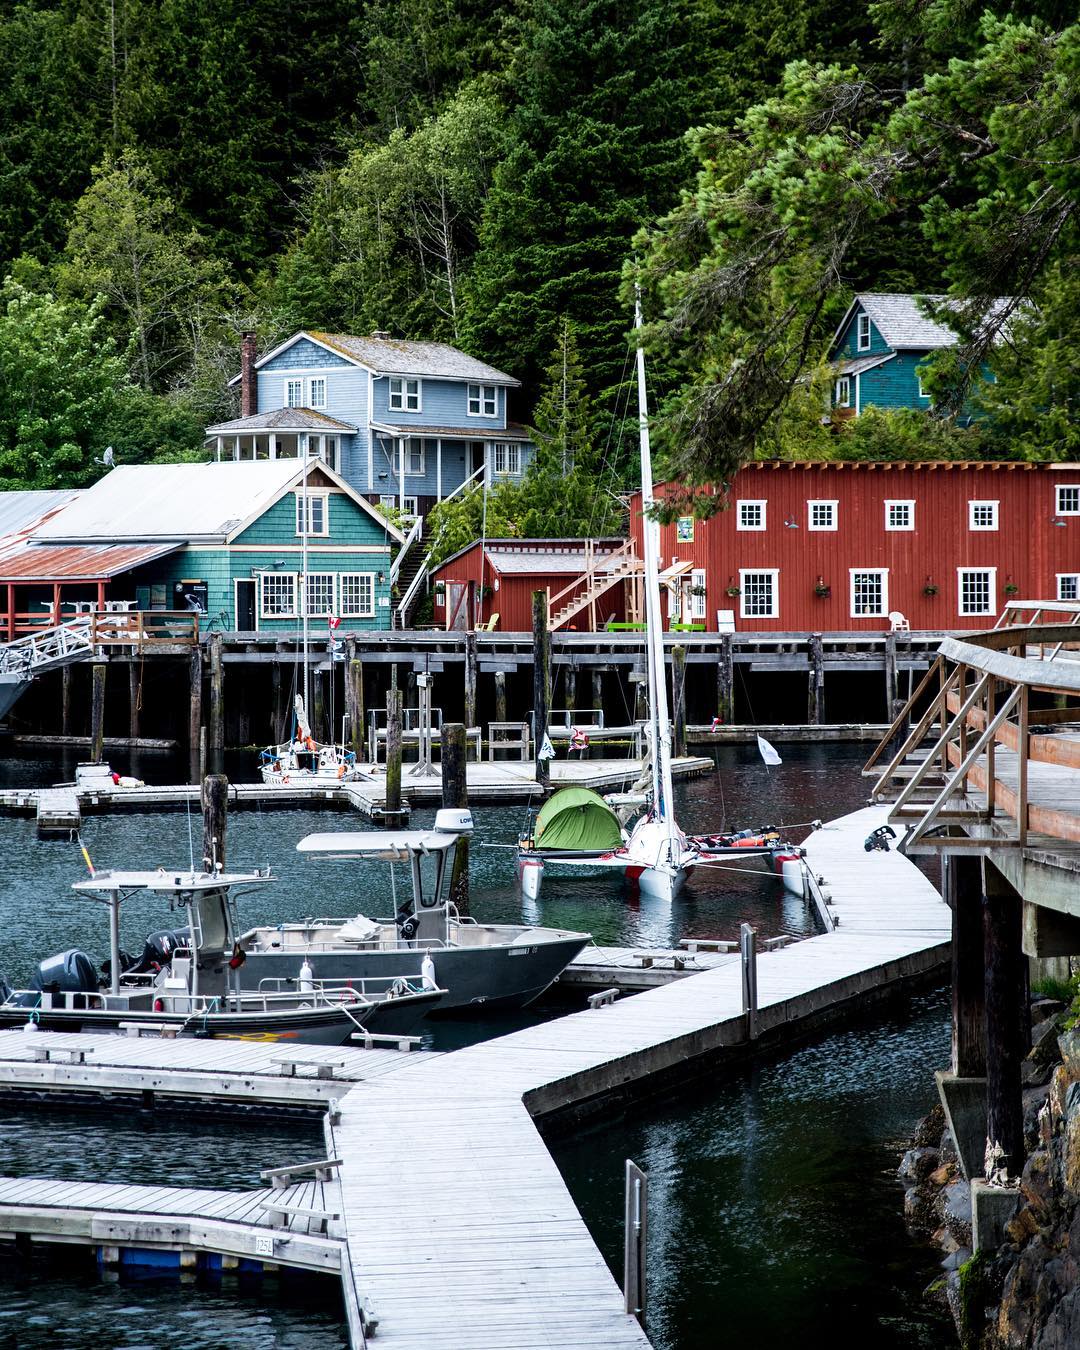 The famed Telegraph Cove